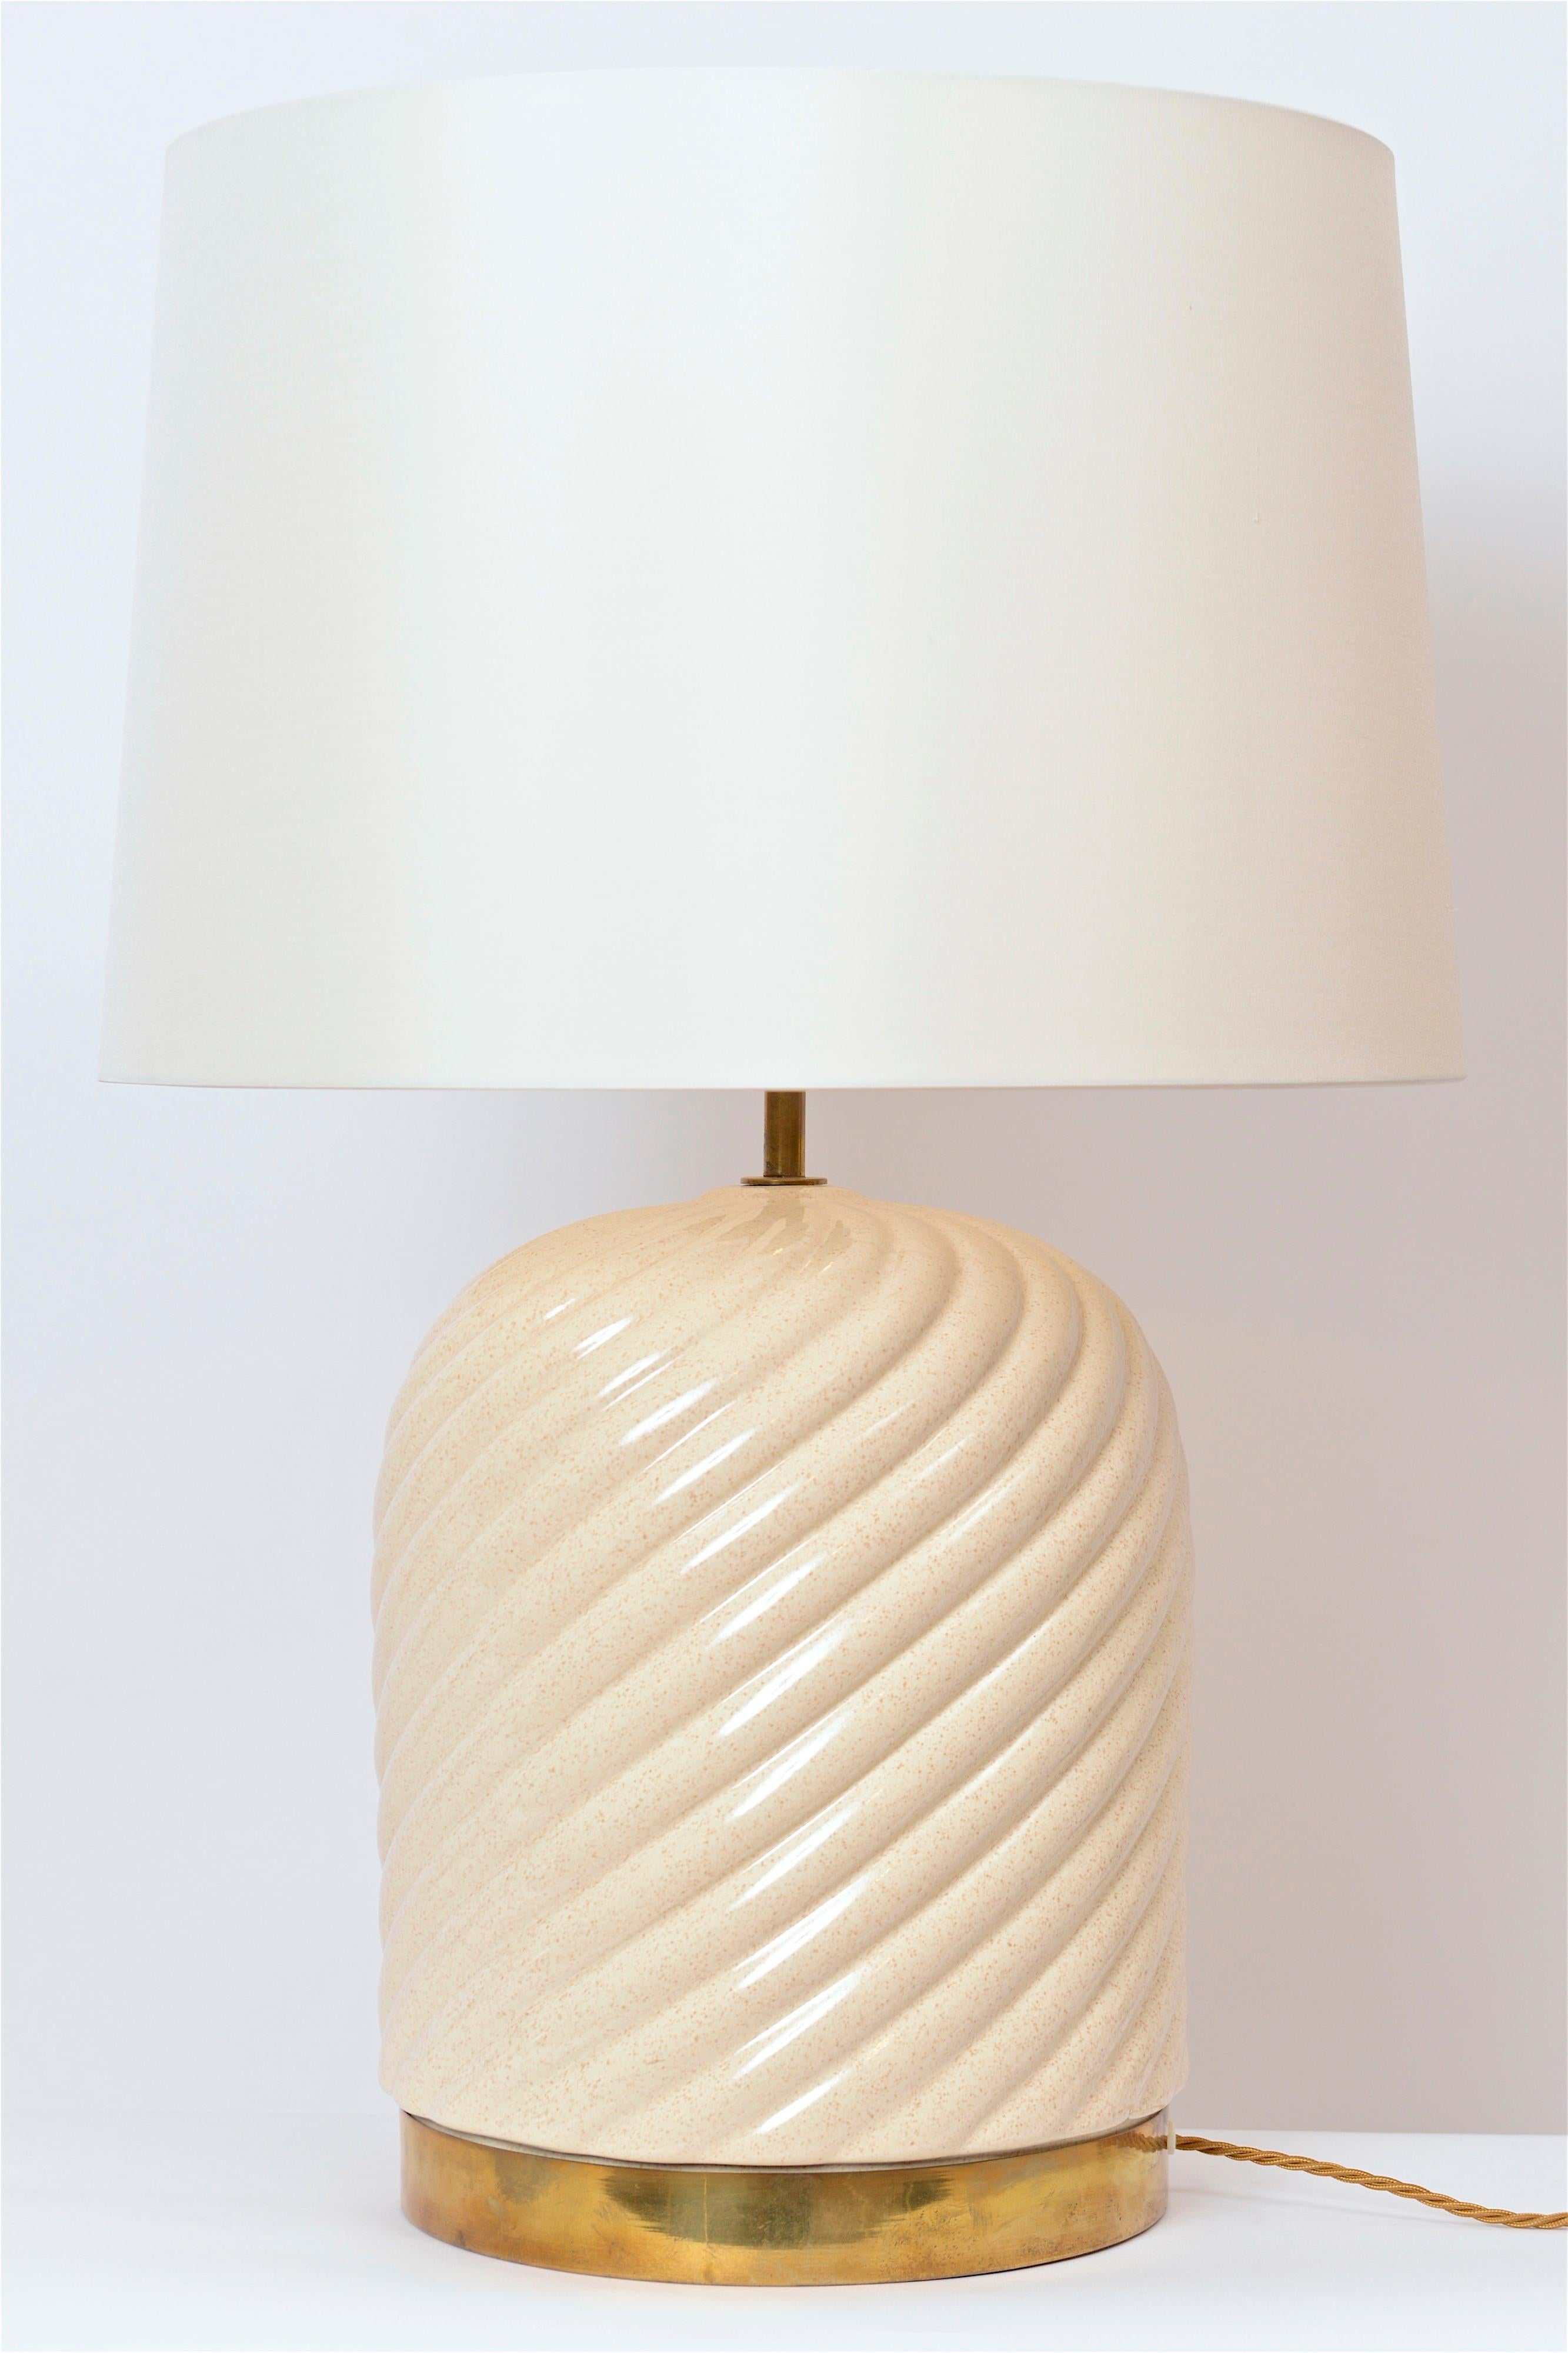 A wonderful pair of cream glazed ceramic table lamps designed by Tommaso Barbi. Manufactured for Barbi by B. Ceramiche in the 1970s, the lamps spiralling ceramic body is finished at the base with Barbi’s signature brass band. Newly re-wired, the